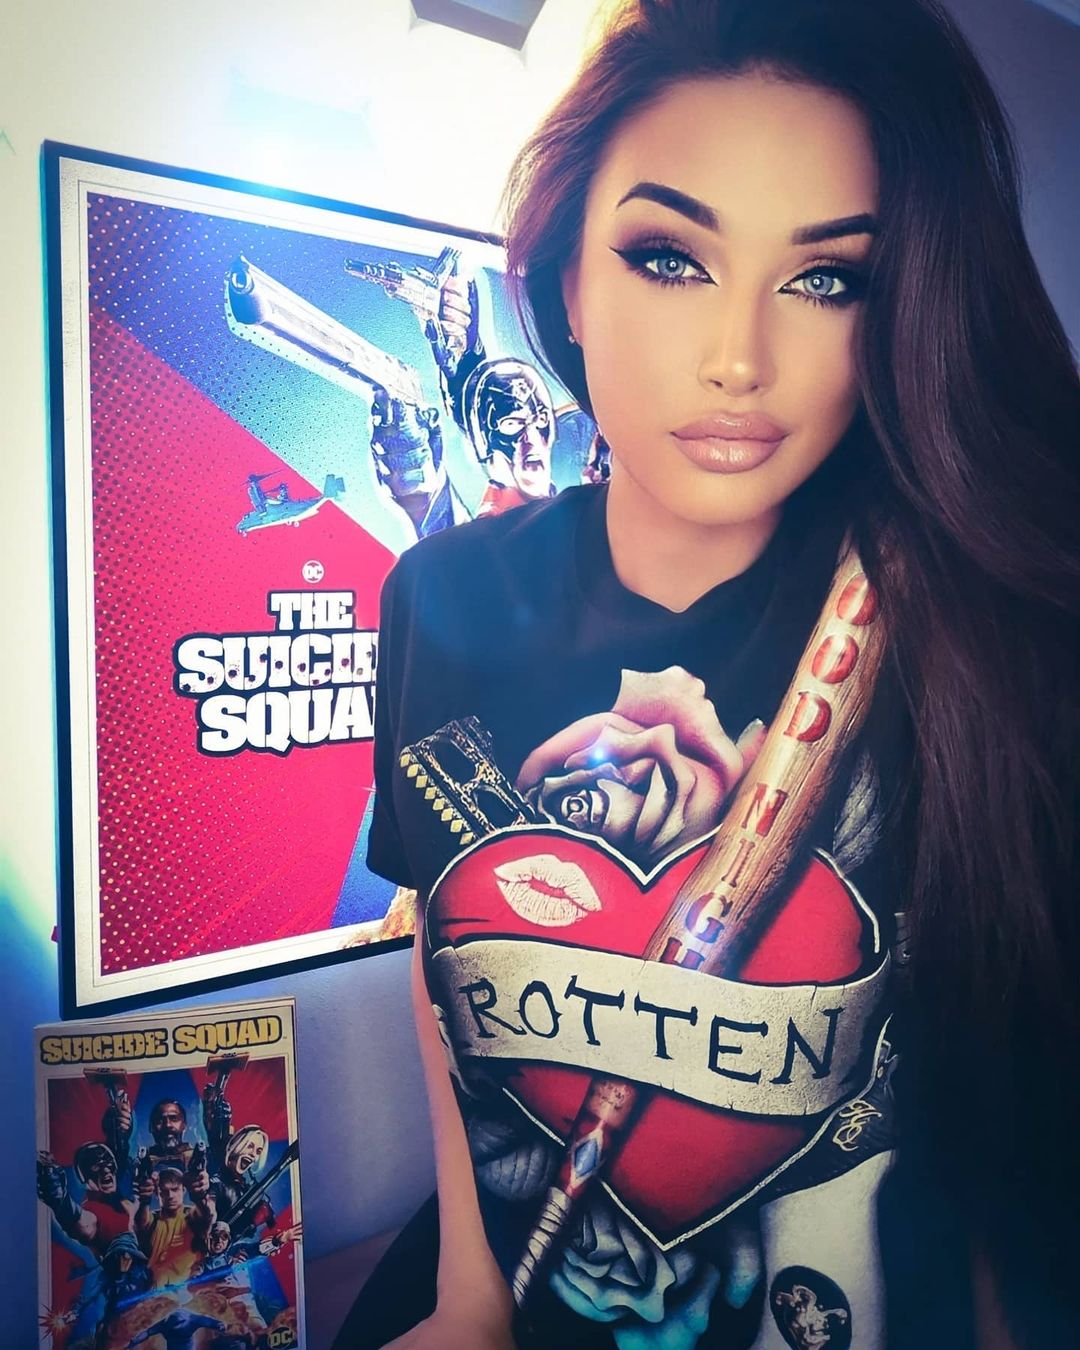 SUICIDE SQUAD 2
Loving this Tee so bad ass.
I got my tee from HMV official (sui 1